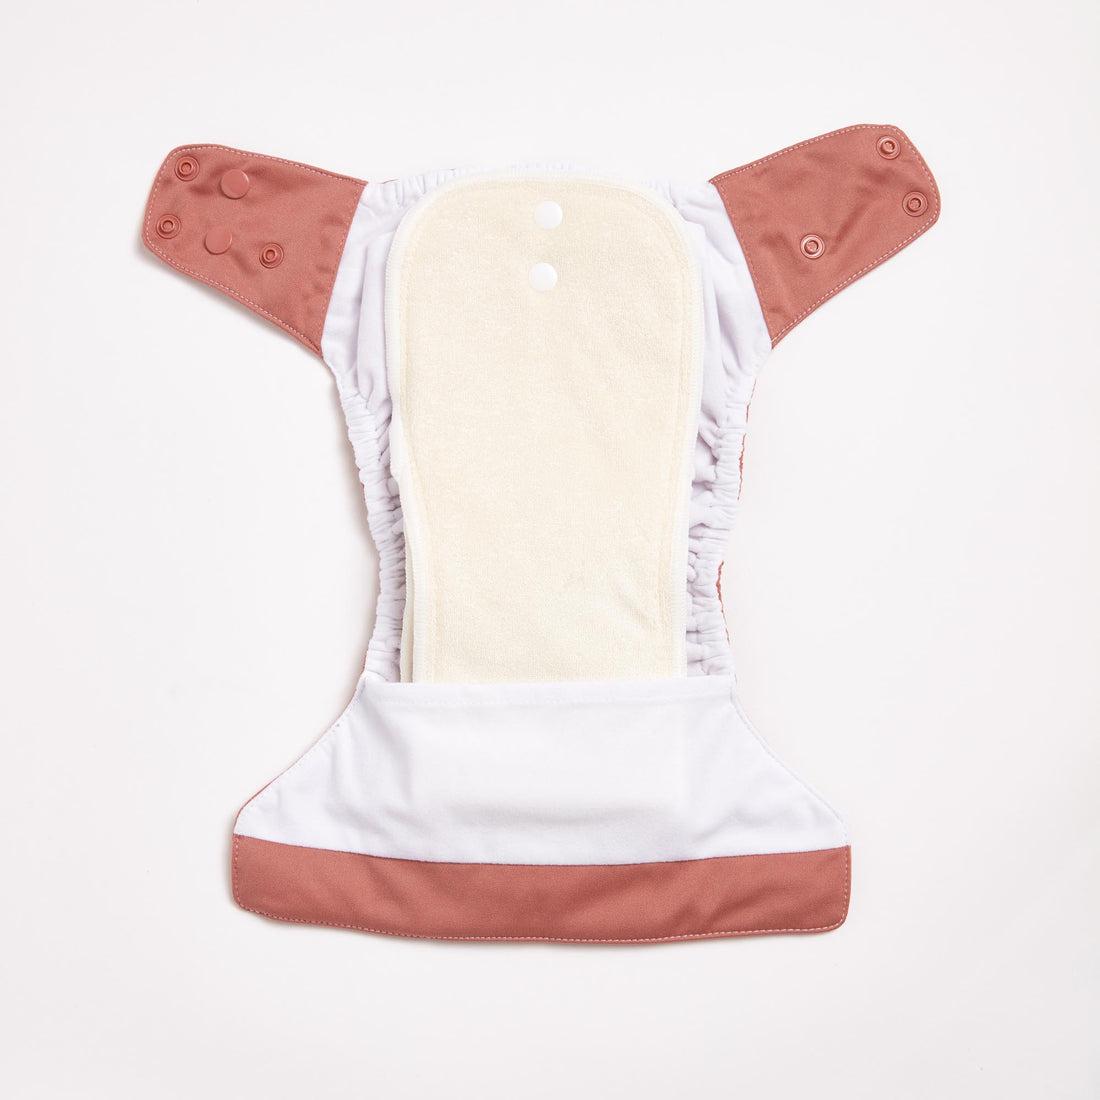 EcoNaps All in Two Pocket Nappy Terracotta-All in Two Nappy-EcoNaps-The Nappy Market